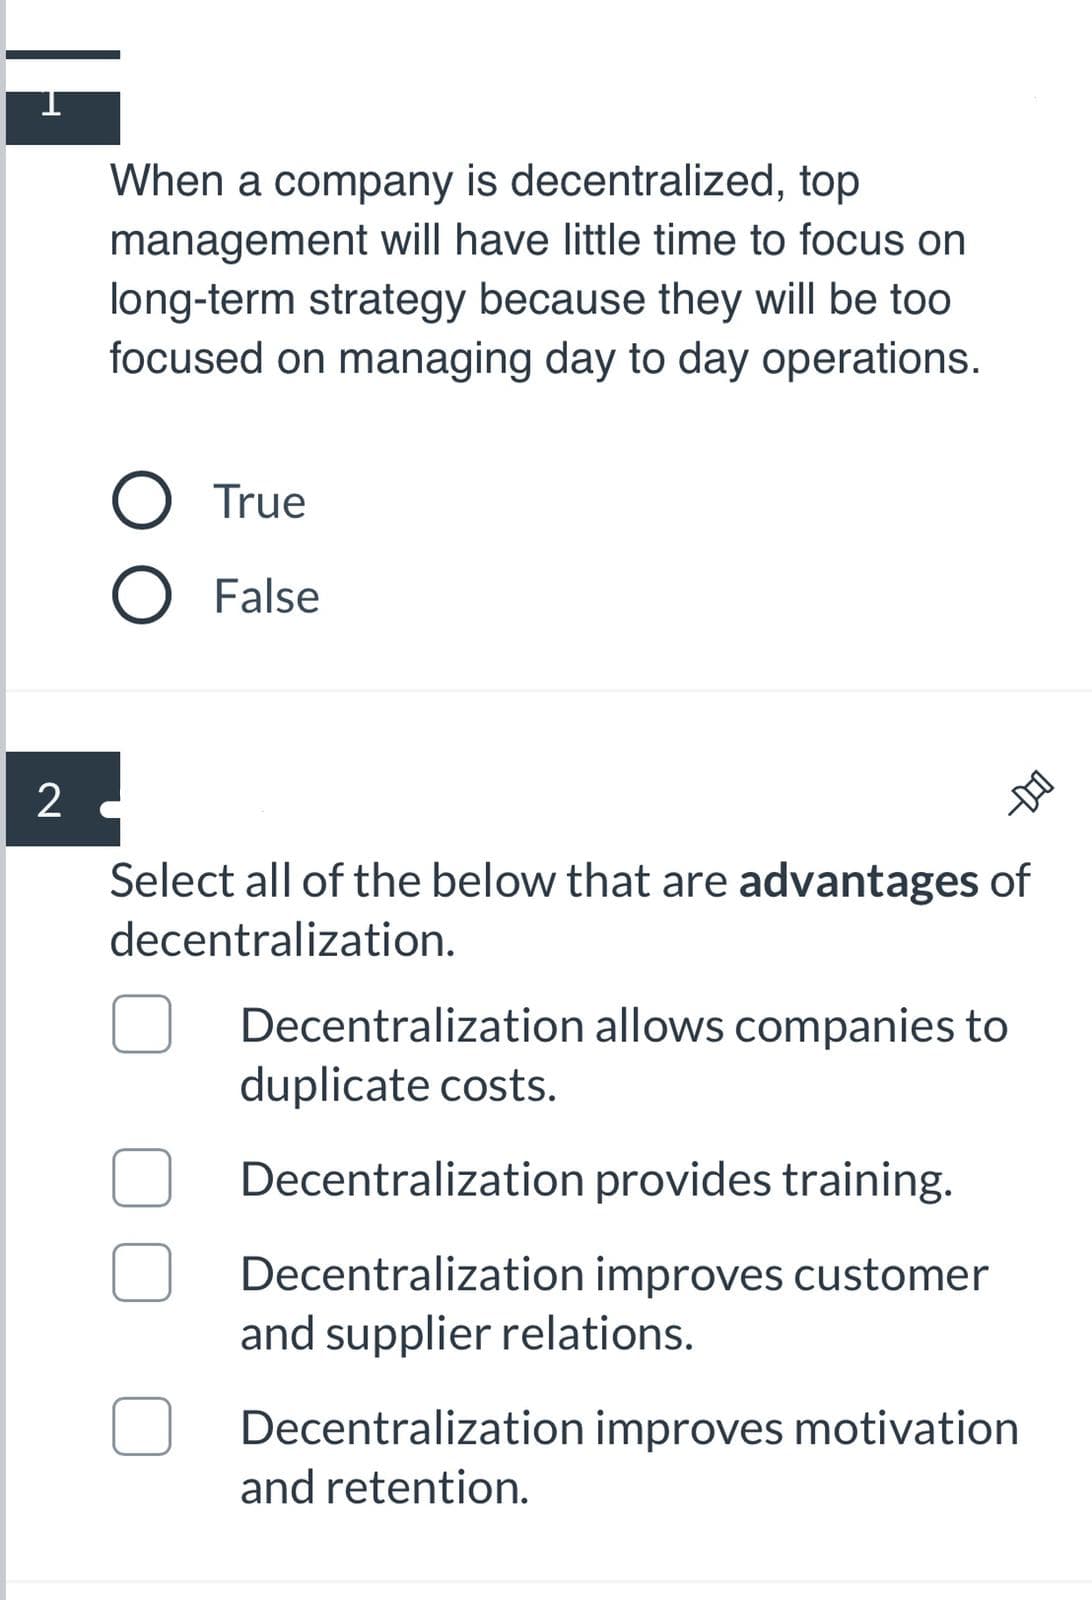 When a company is decentralized, top
management will have little time to focus on
long-term strategy because they will be too
focused on managing day to day operations.
True
O False
Select all of the below that are advantages of
decentralization.
Decentralization allows companies to
duplicate costs.
Decentralization provides training.
Decentralization improves customer
and supplier relations.
Decentralization improves motivation
and retention.
